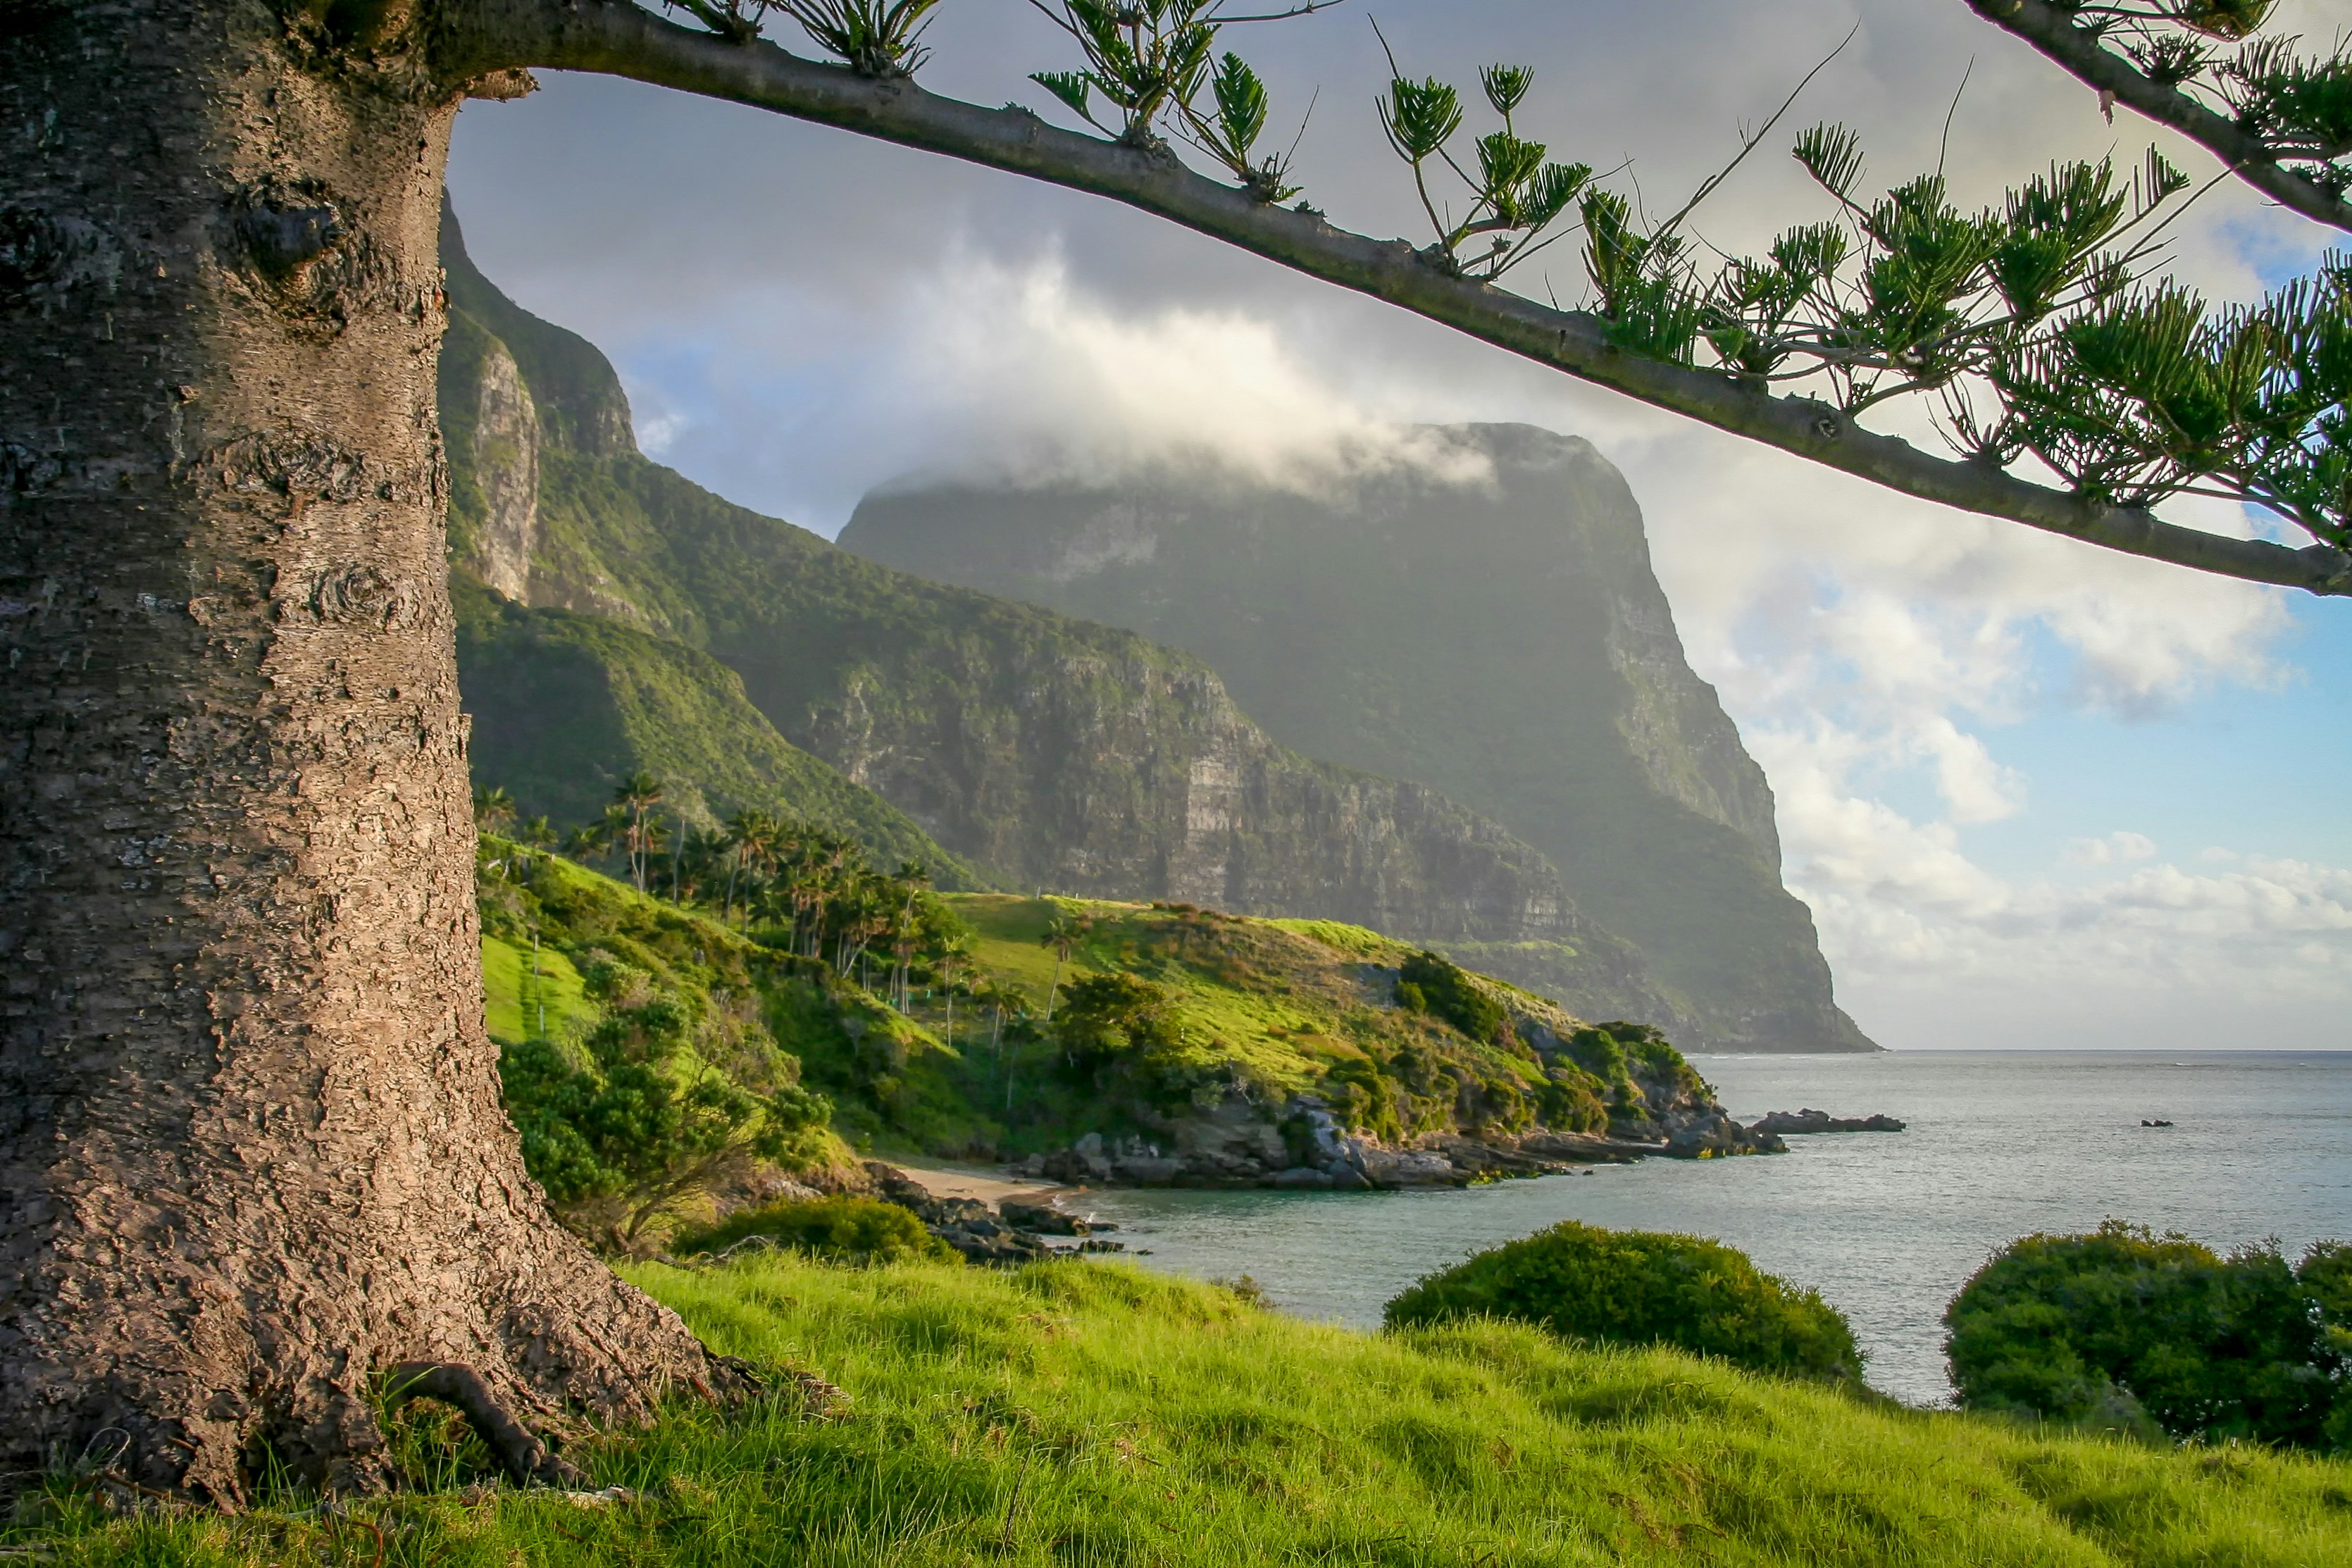 A view of Mt Gower, Lord Howe Island framed by the branches of a Norfolk Pine tree